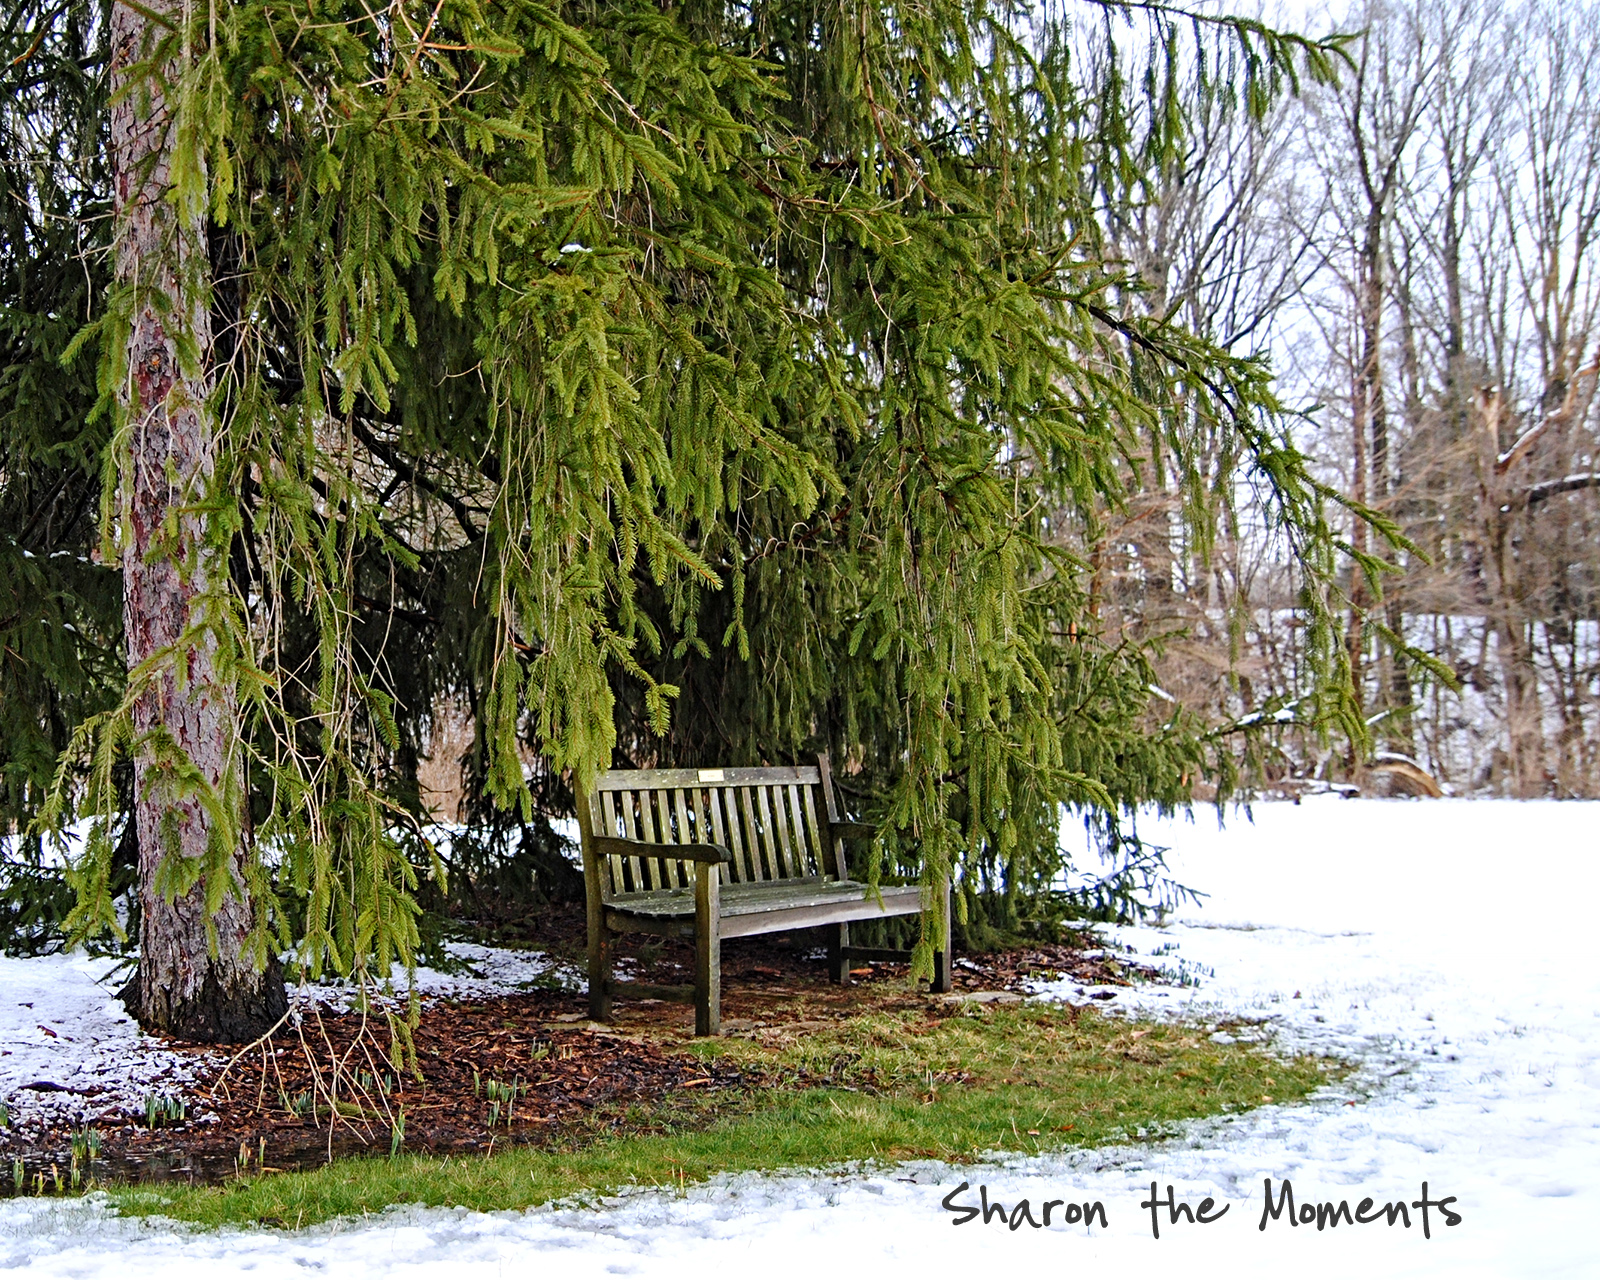 Favorite Photo Friday Snow Day at Sharon Woods and Inniswood Park|Sharon the Moments blog